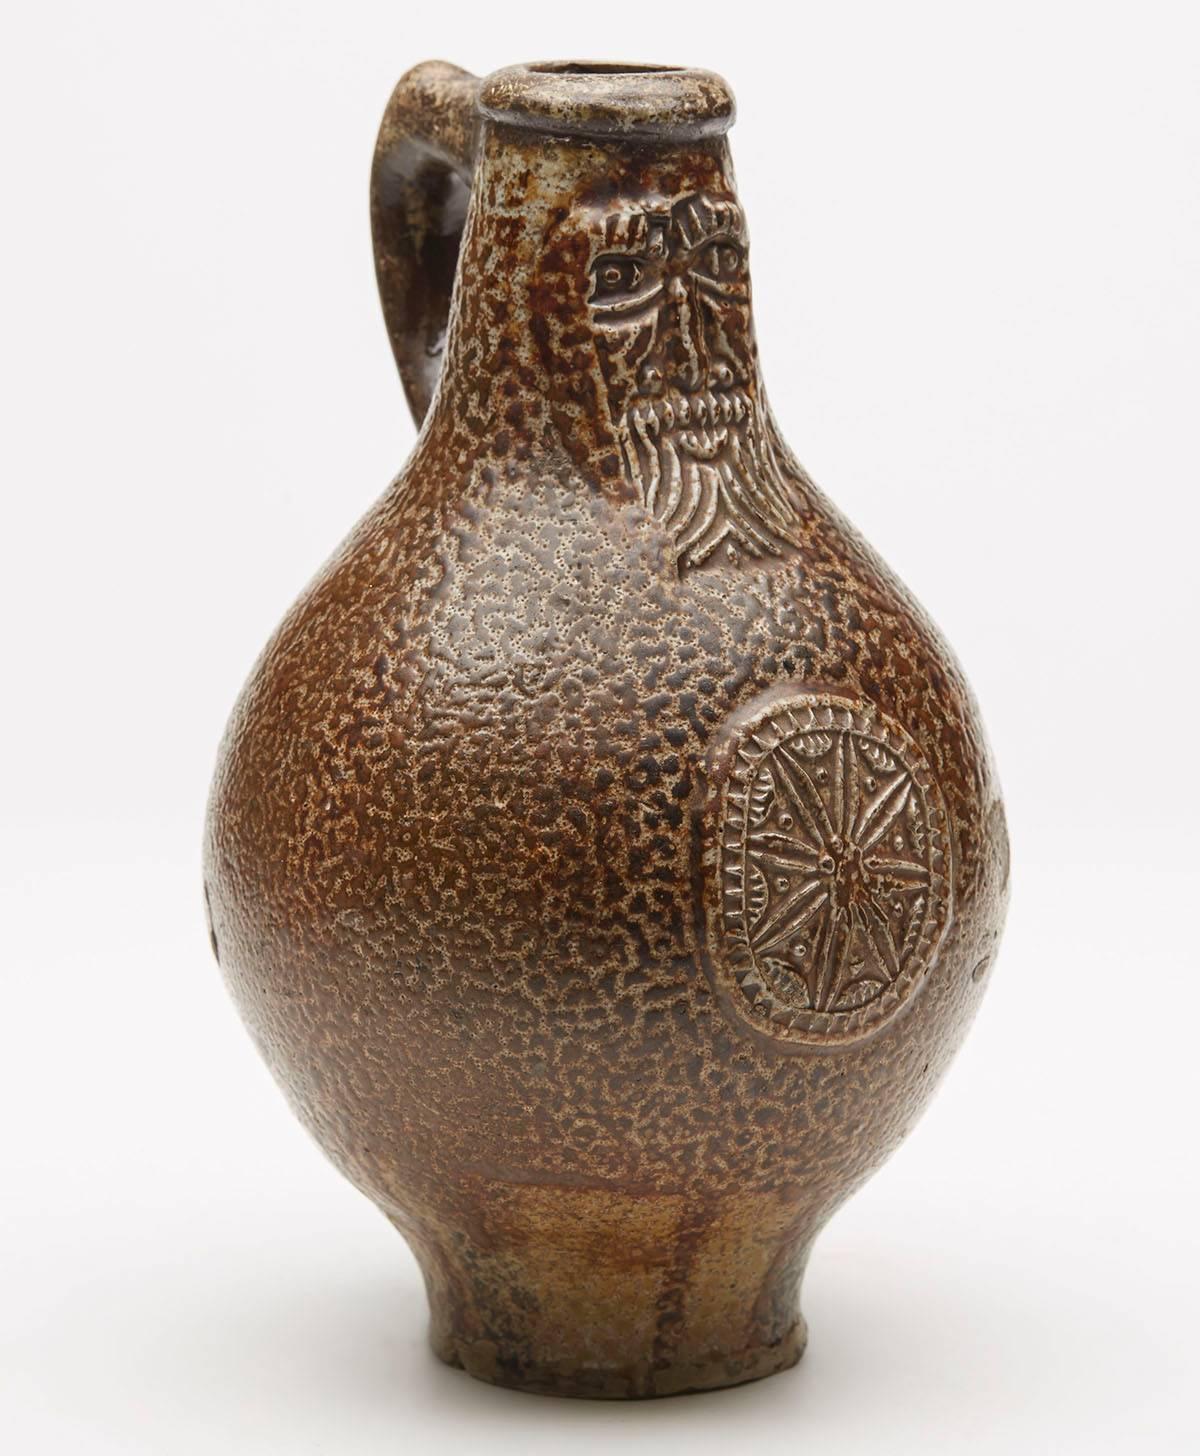 An interesting antique German Rheinish Bellarmine bottle shaped stoneware jug applied with a bearded mask along with a floral crest to the body. The jug has a brown salt glazed speckled finish and is not marked.
   